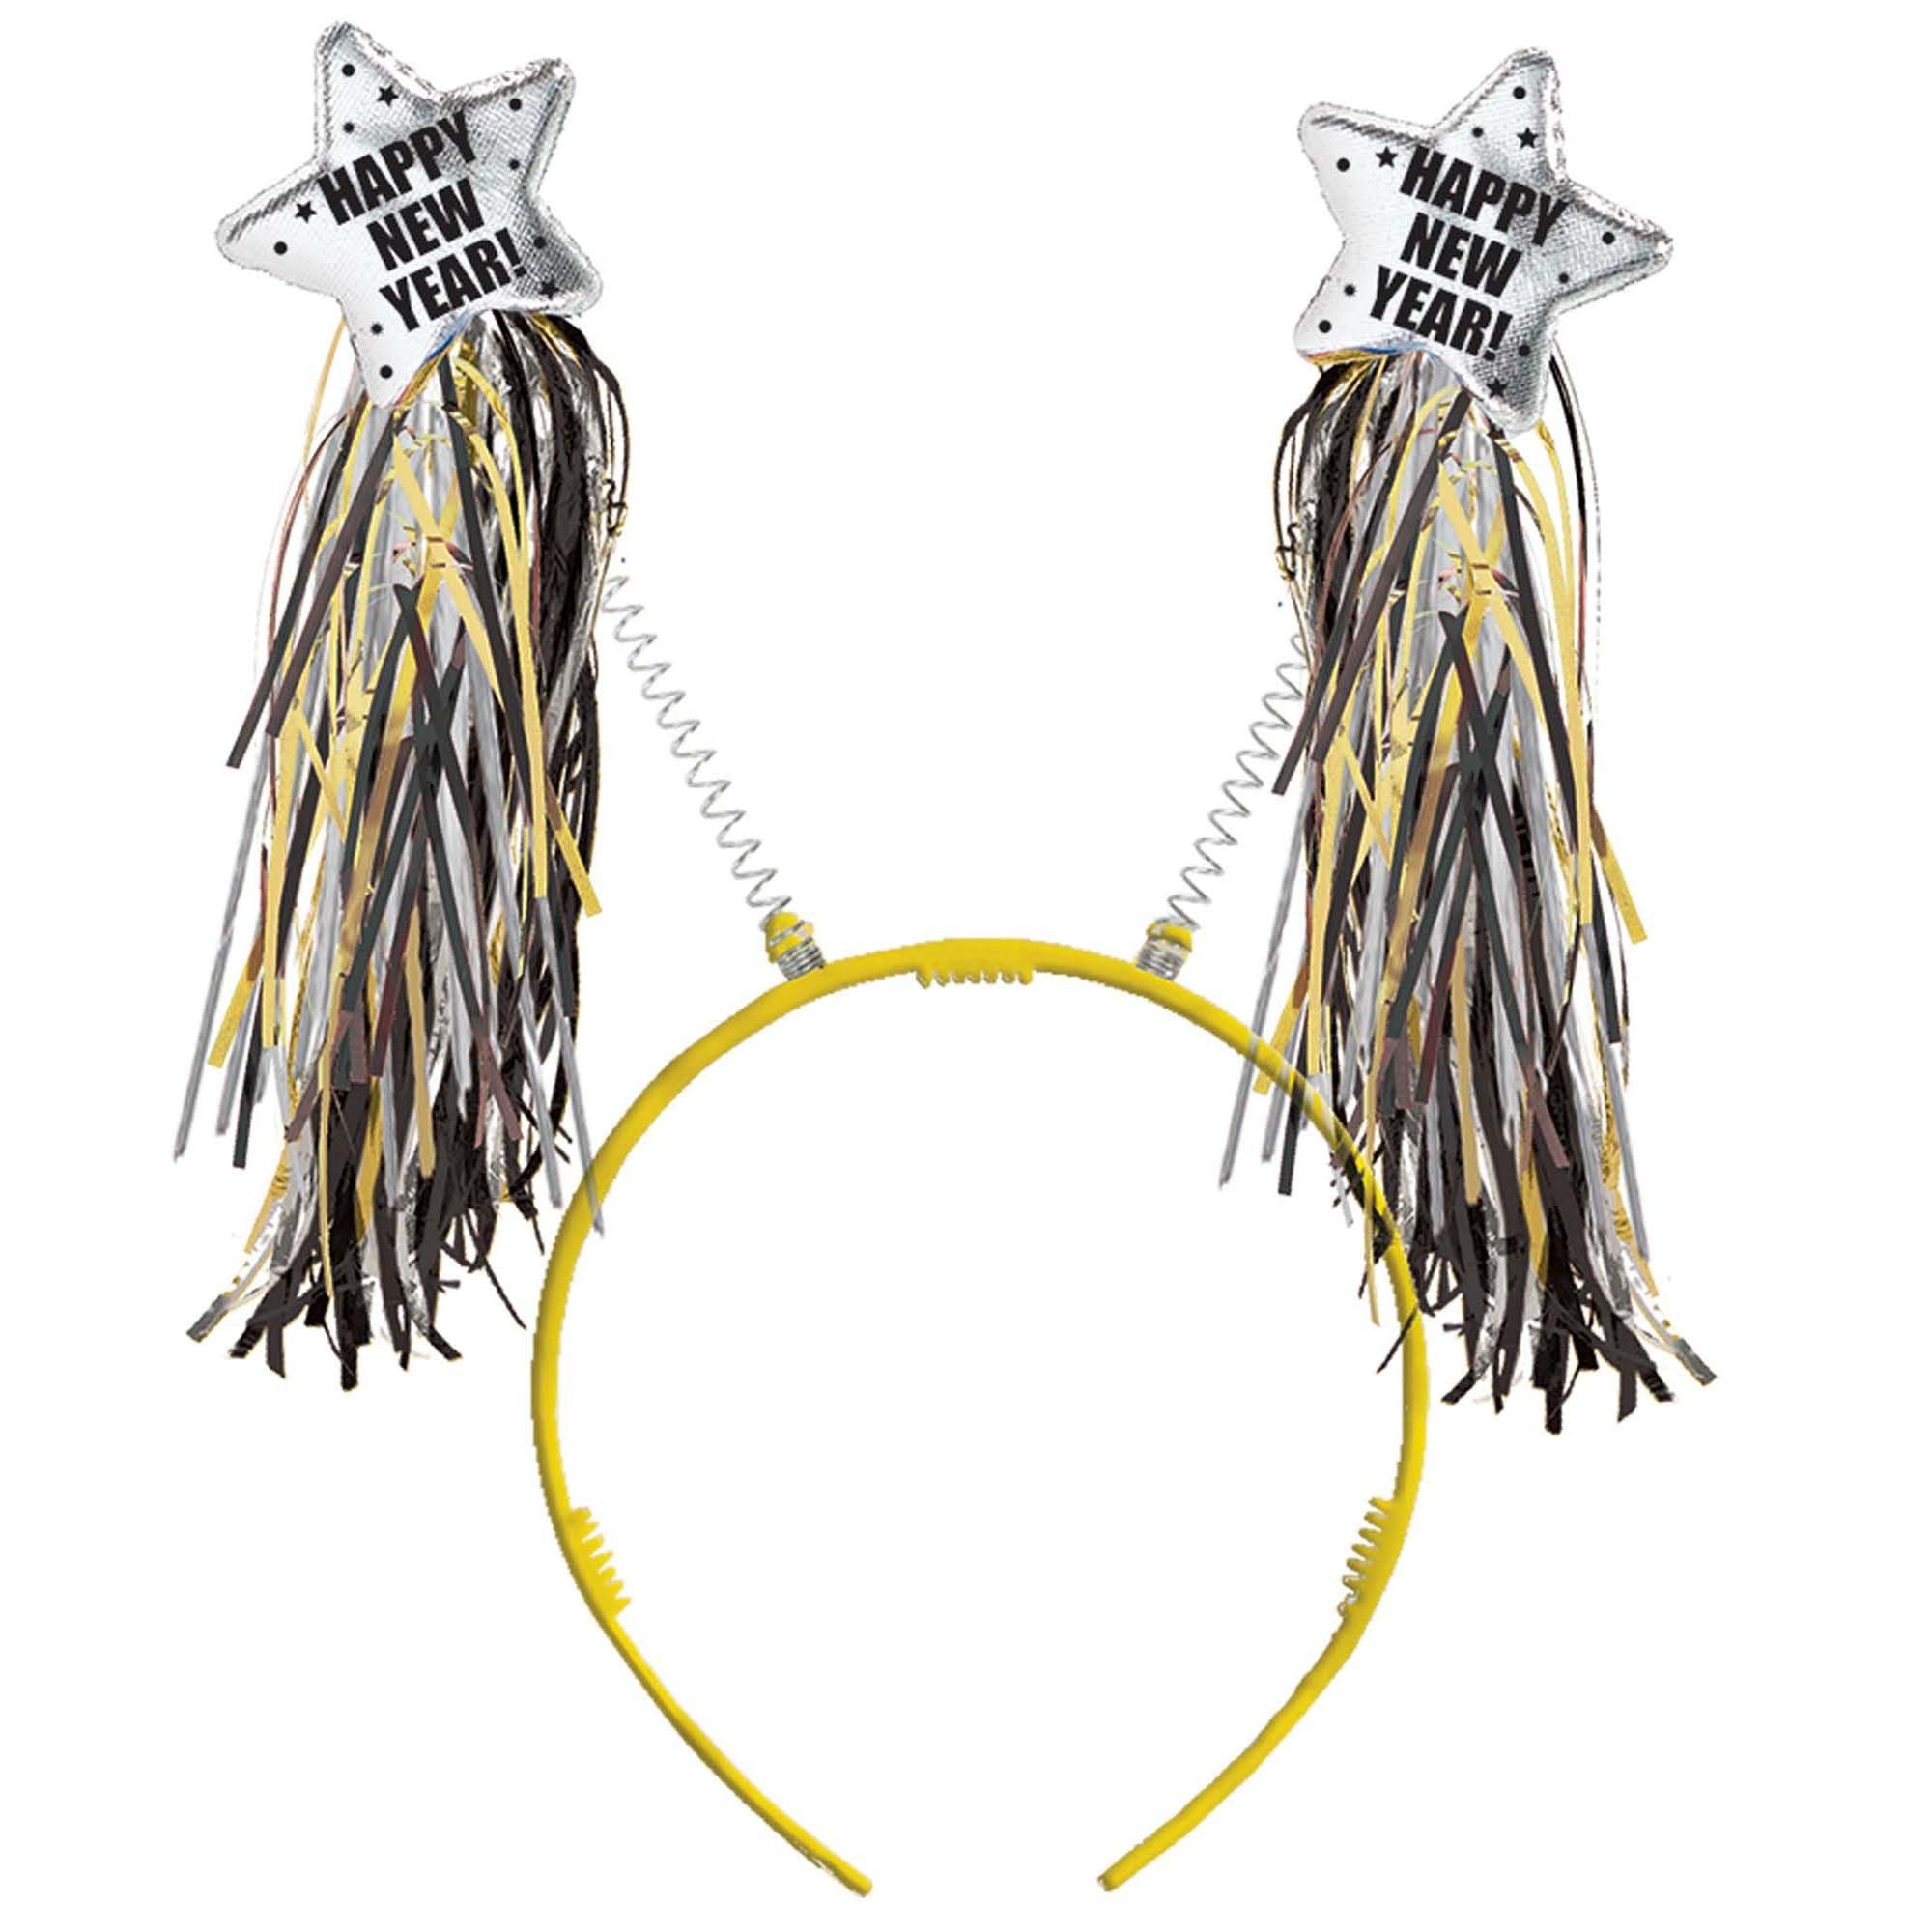 Amscan HOLIDAY: NEW YEAR'S New Year Tinsel Headbopper - Black, Silver, Gold